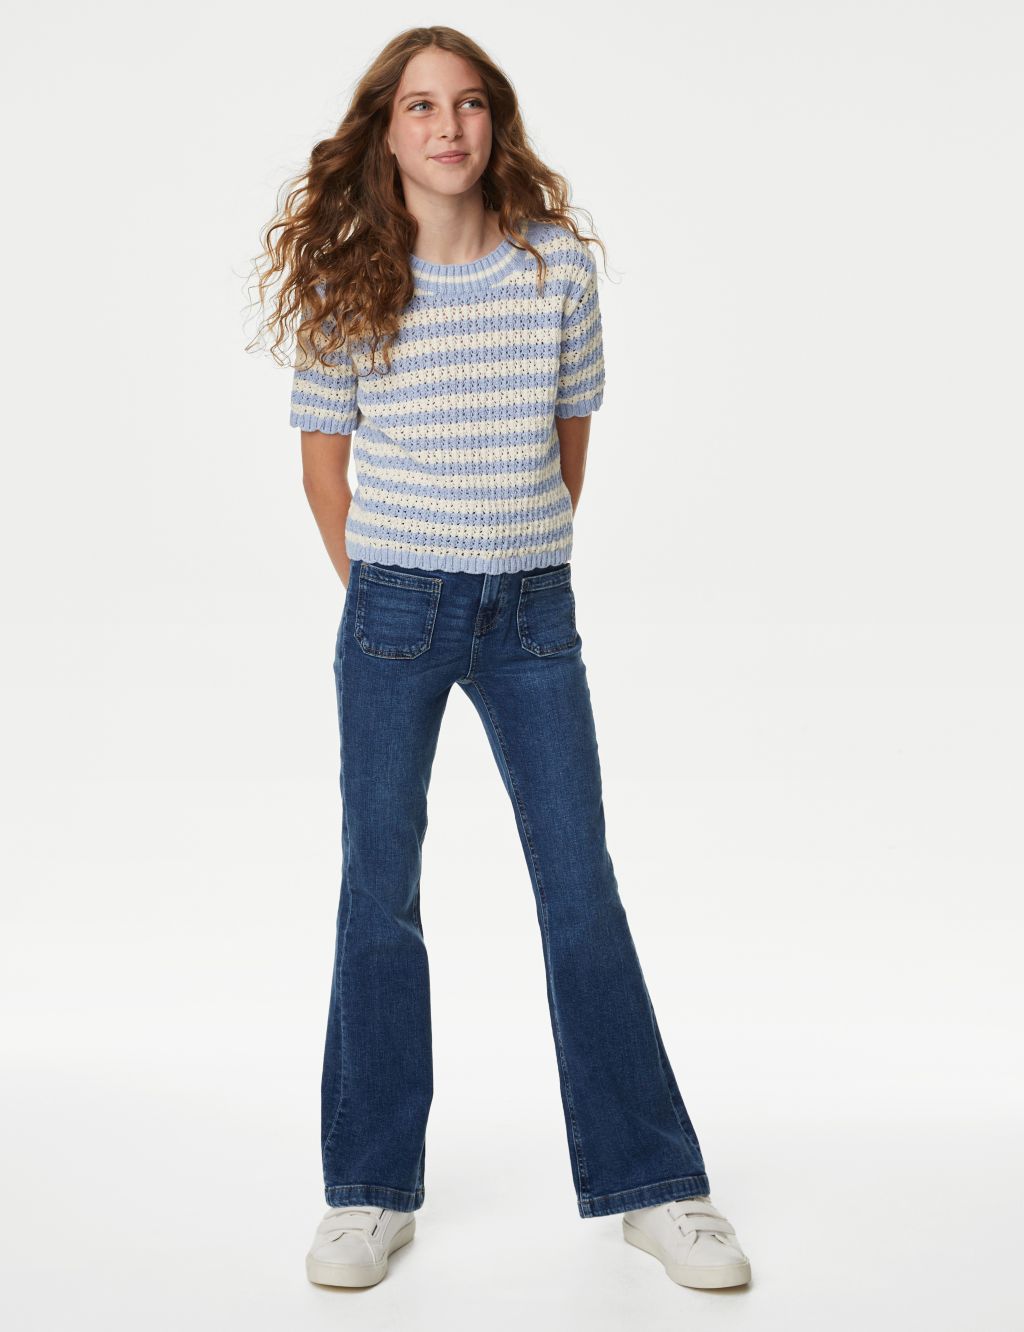 Jeans for Girls | Girls' Jeans | M&S